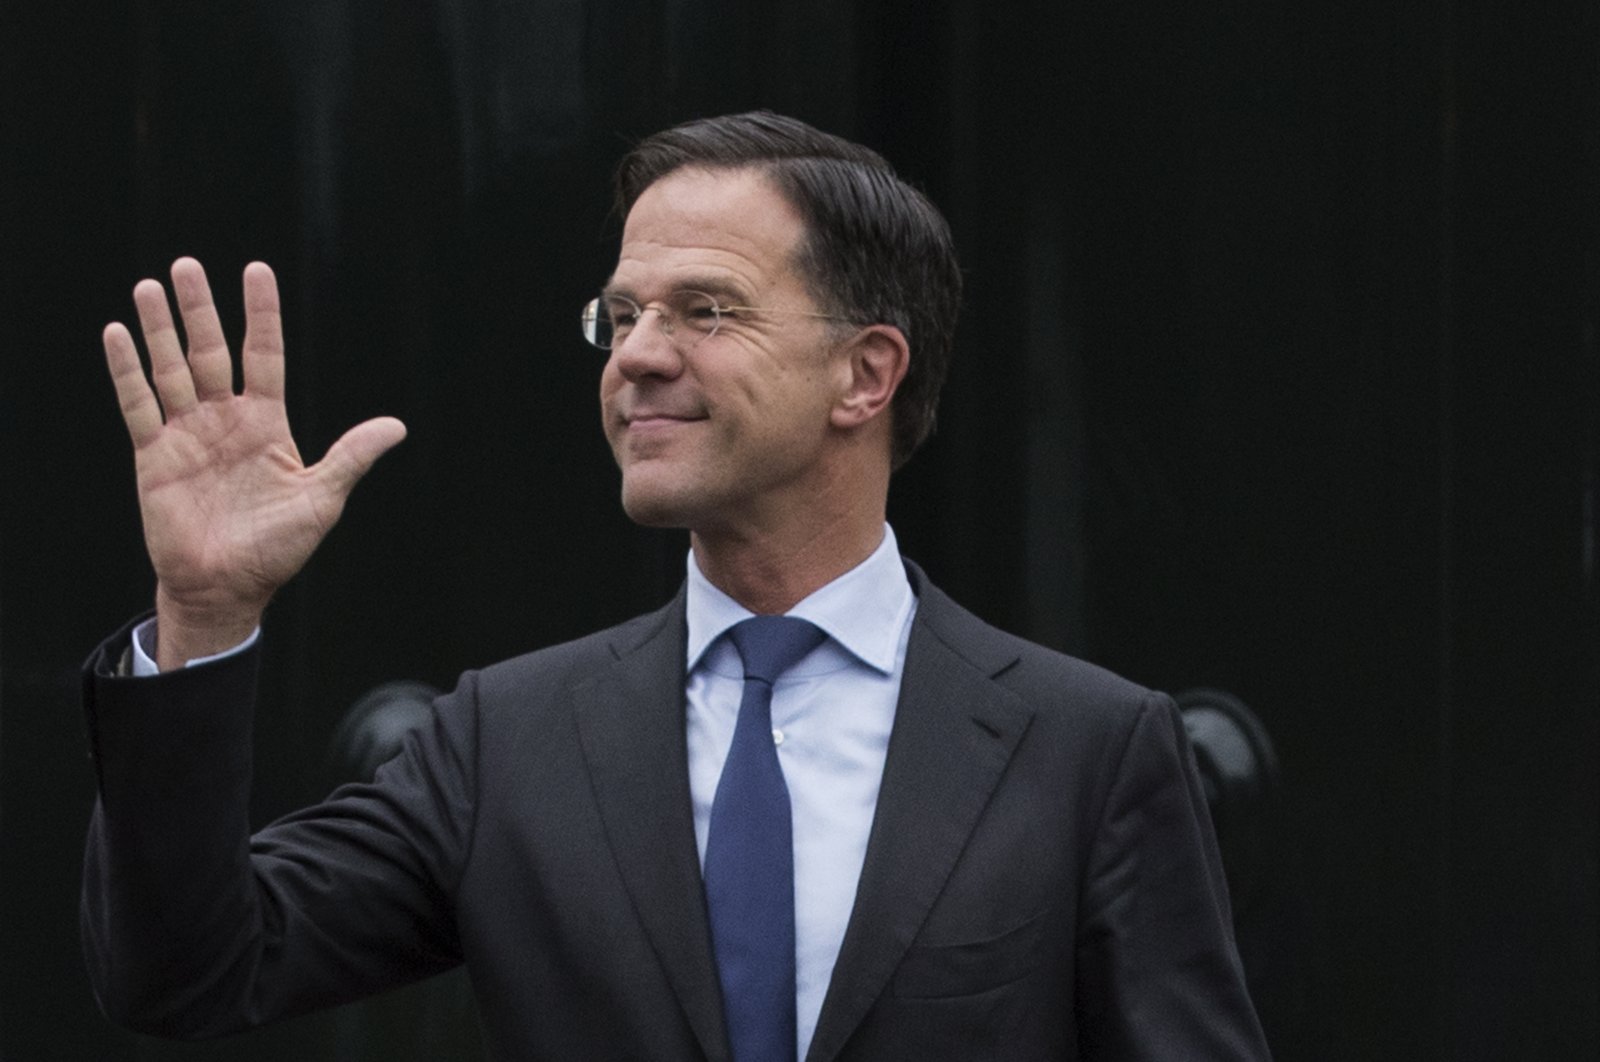 Dutch Prime Minister Mark Rutte waves as he waits for European Council President Donald Tusk to arrive for a meeting at Catshuis residence in The Hague, Netherlands, March 15, 2019. (AP Photo)